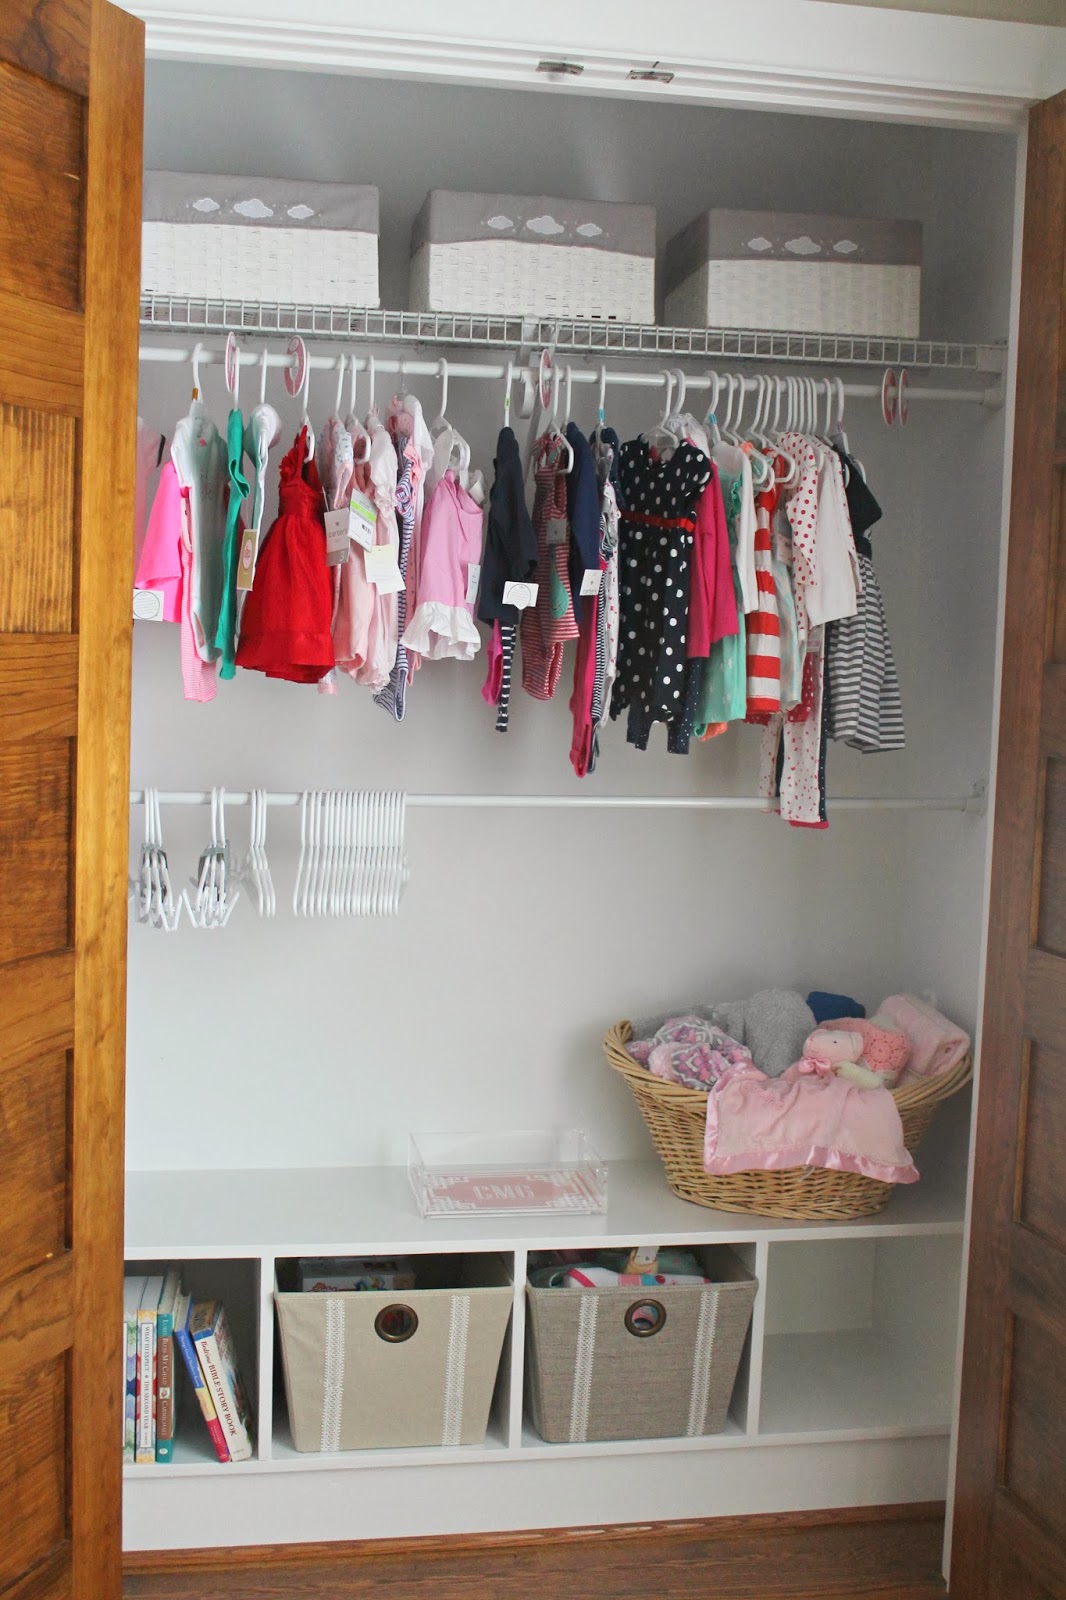 Baby Closet Organization Ideas (7 Must-Try Tips) - Mommyhooding